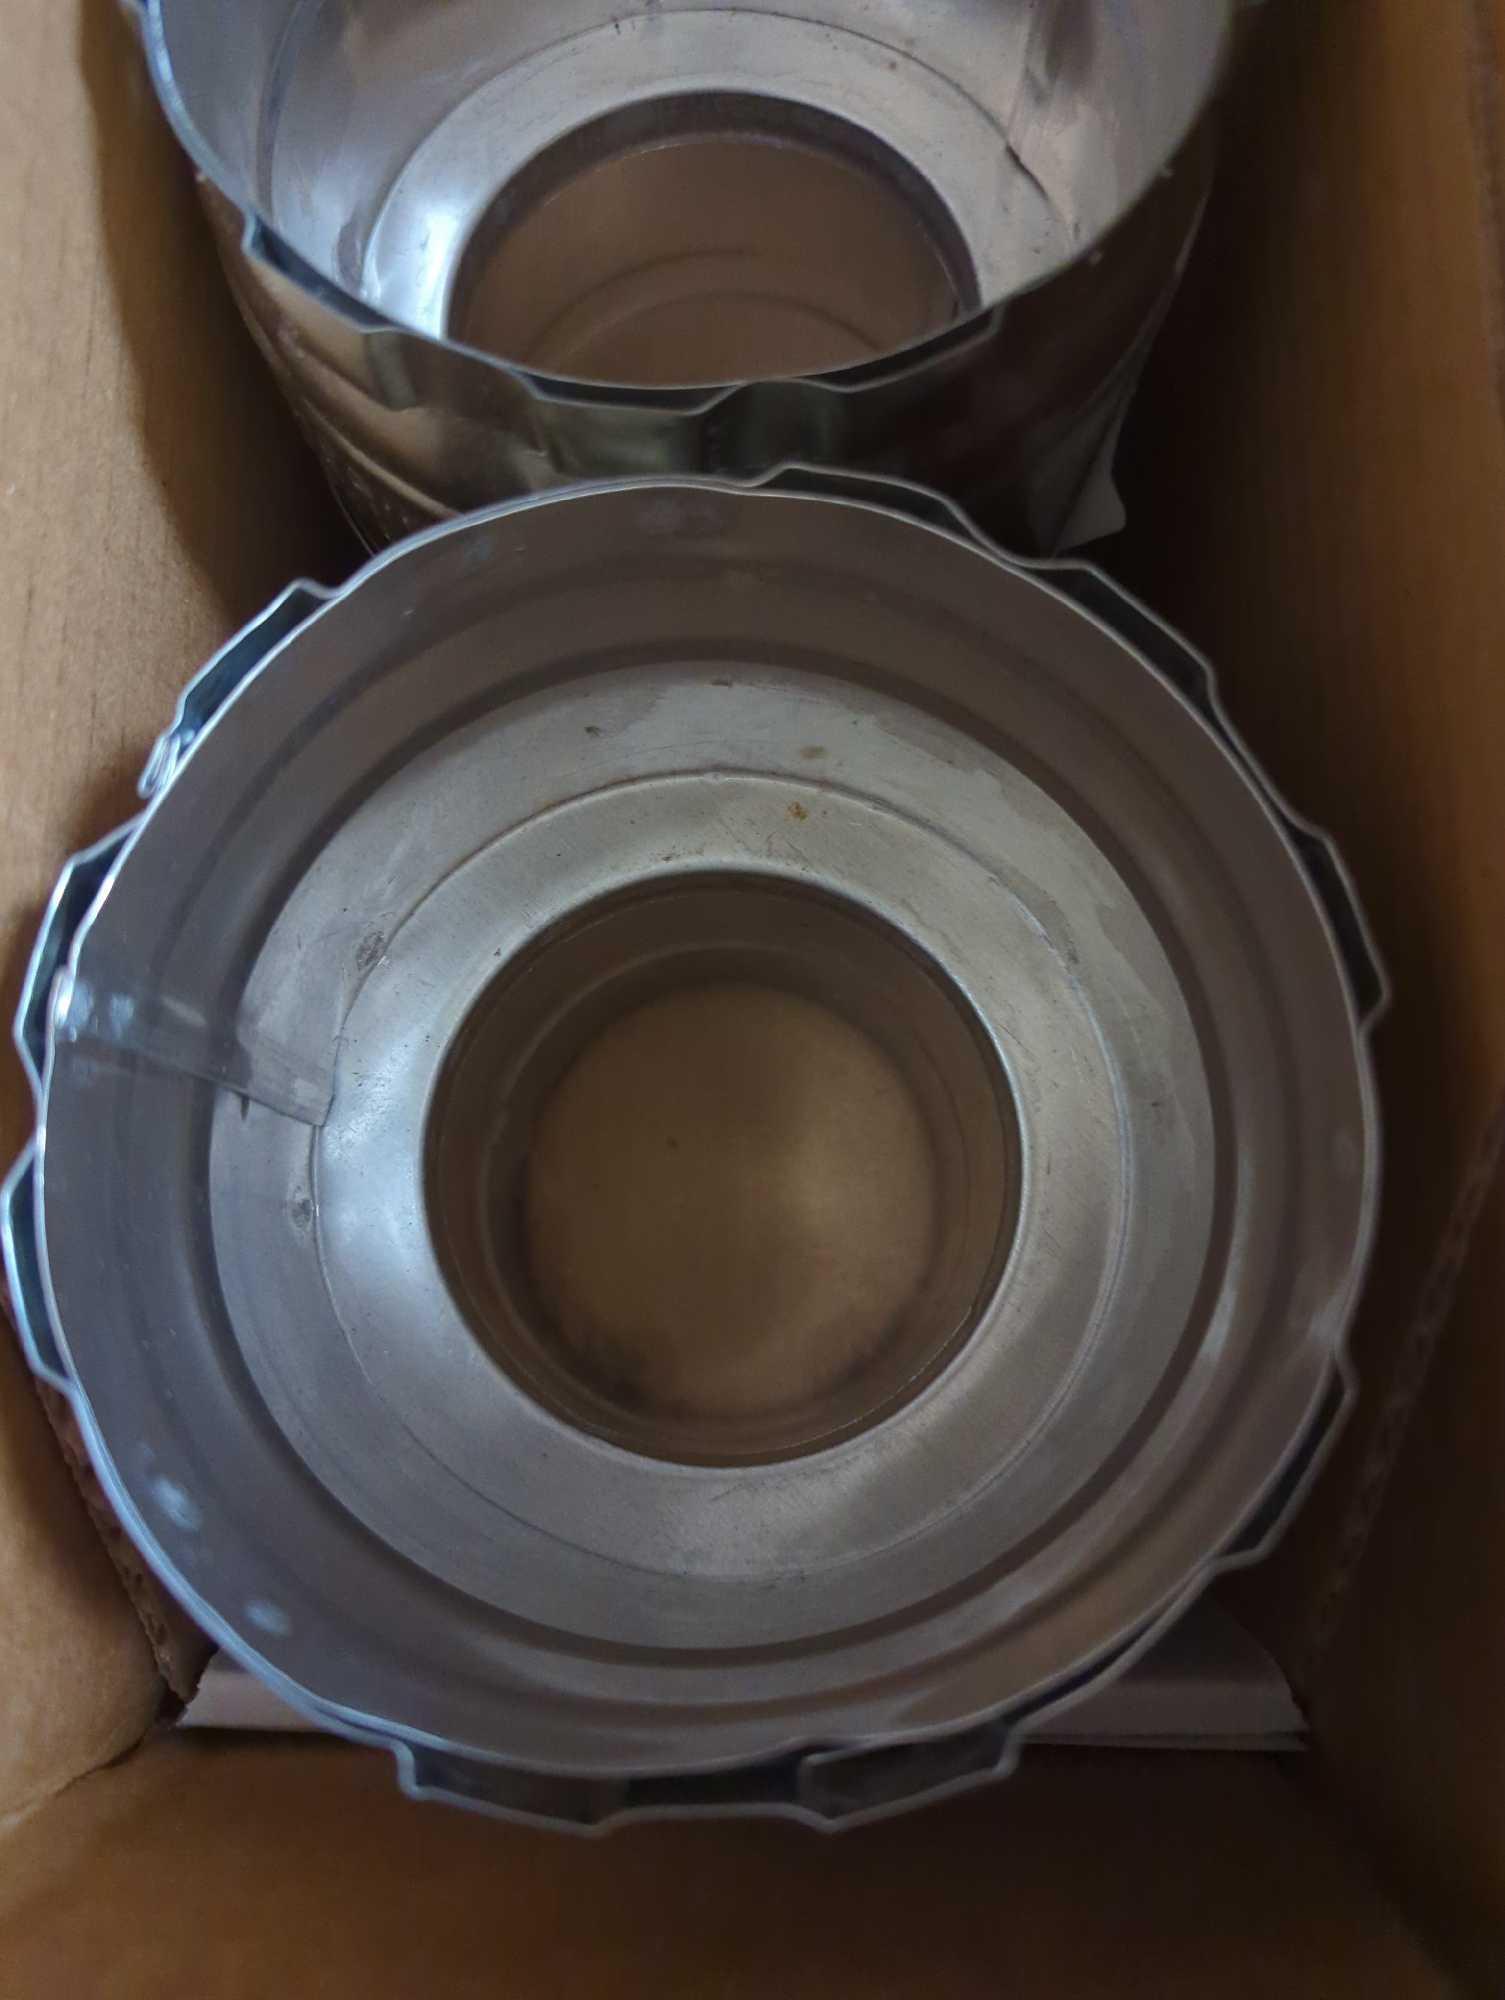 Lot of 3 Boxes of Amerivent to include, 4 inch Single Wall Appliance Metal Quantity 6, 4 Inch 45